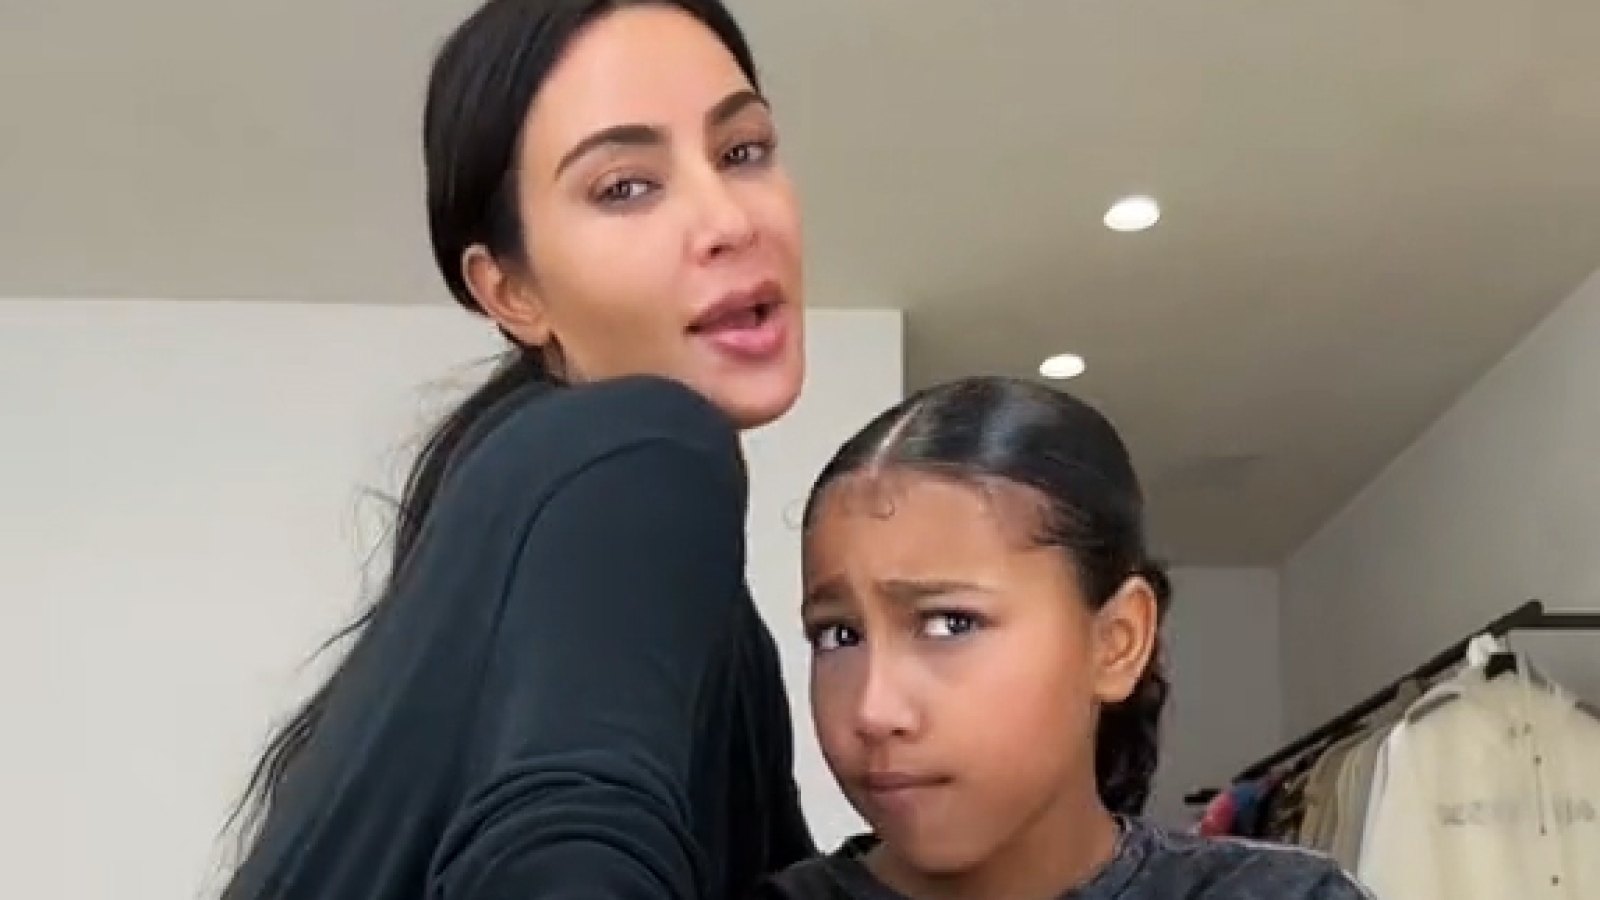 Kim Kardashian Gets Glam With Daughter North West in Adorable Video